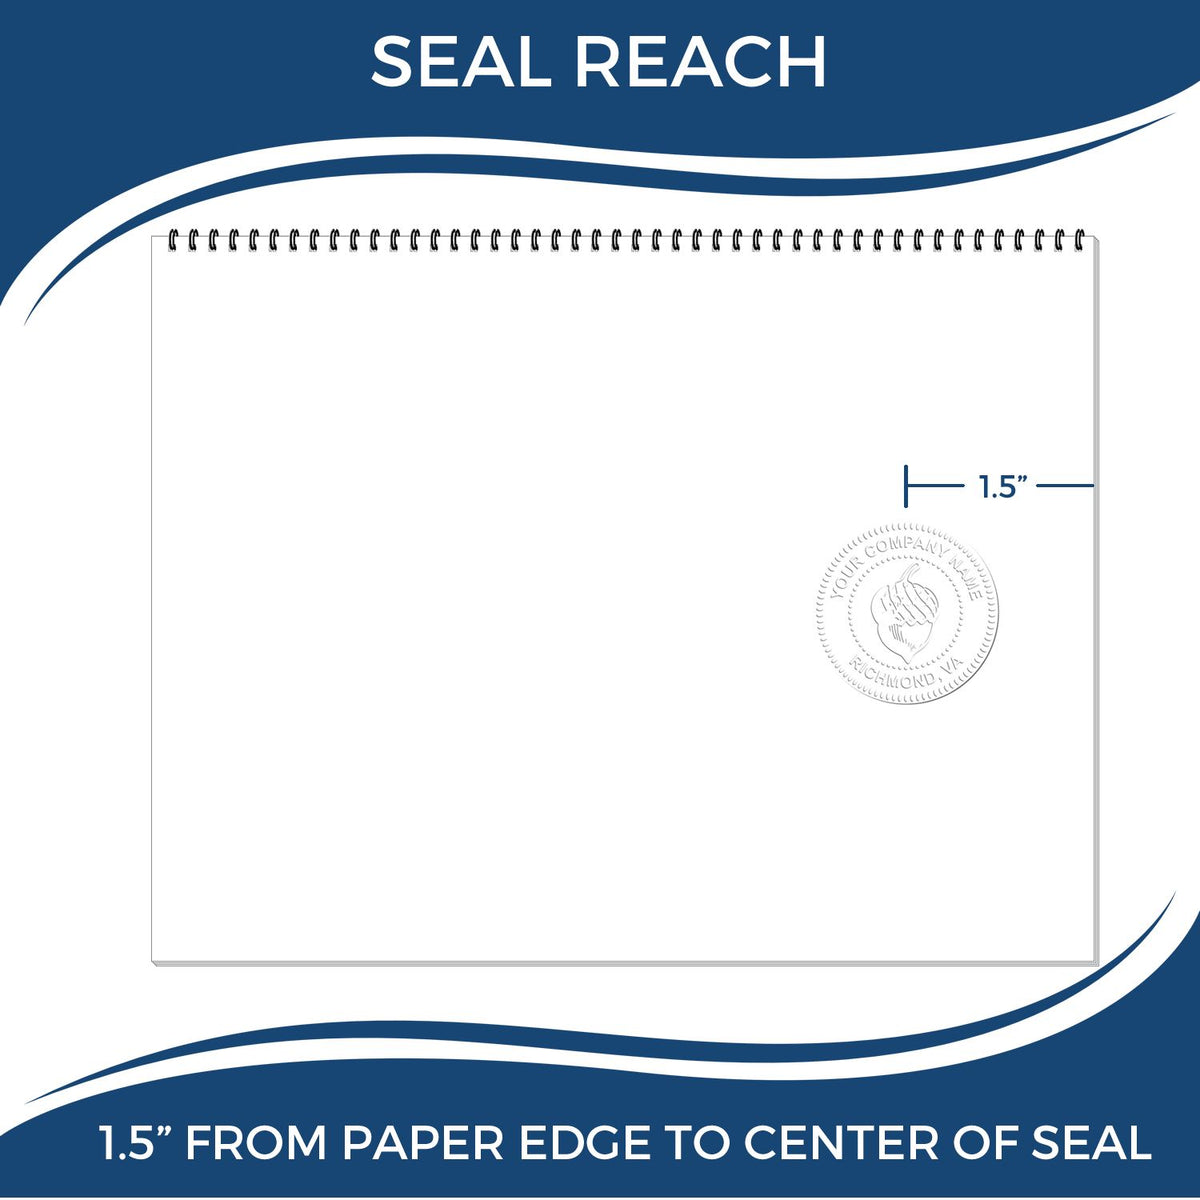 An infographic showing the seal reach which is represented by a ruler and a miniature seal image of the Kansas Geologist Desk Seal